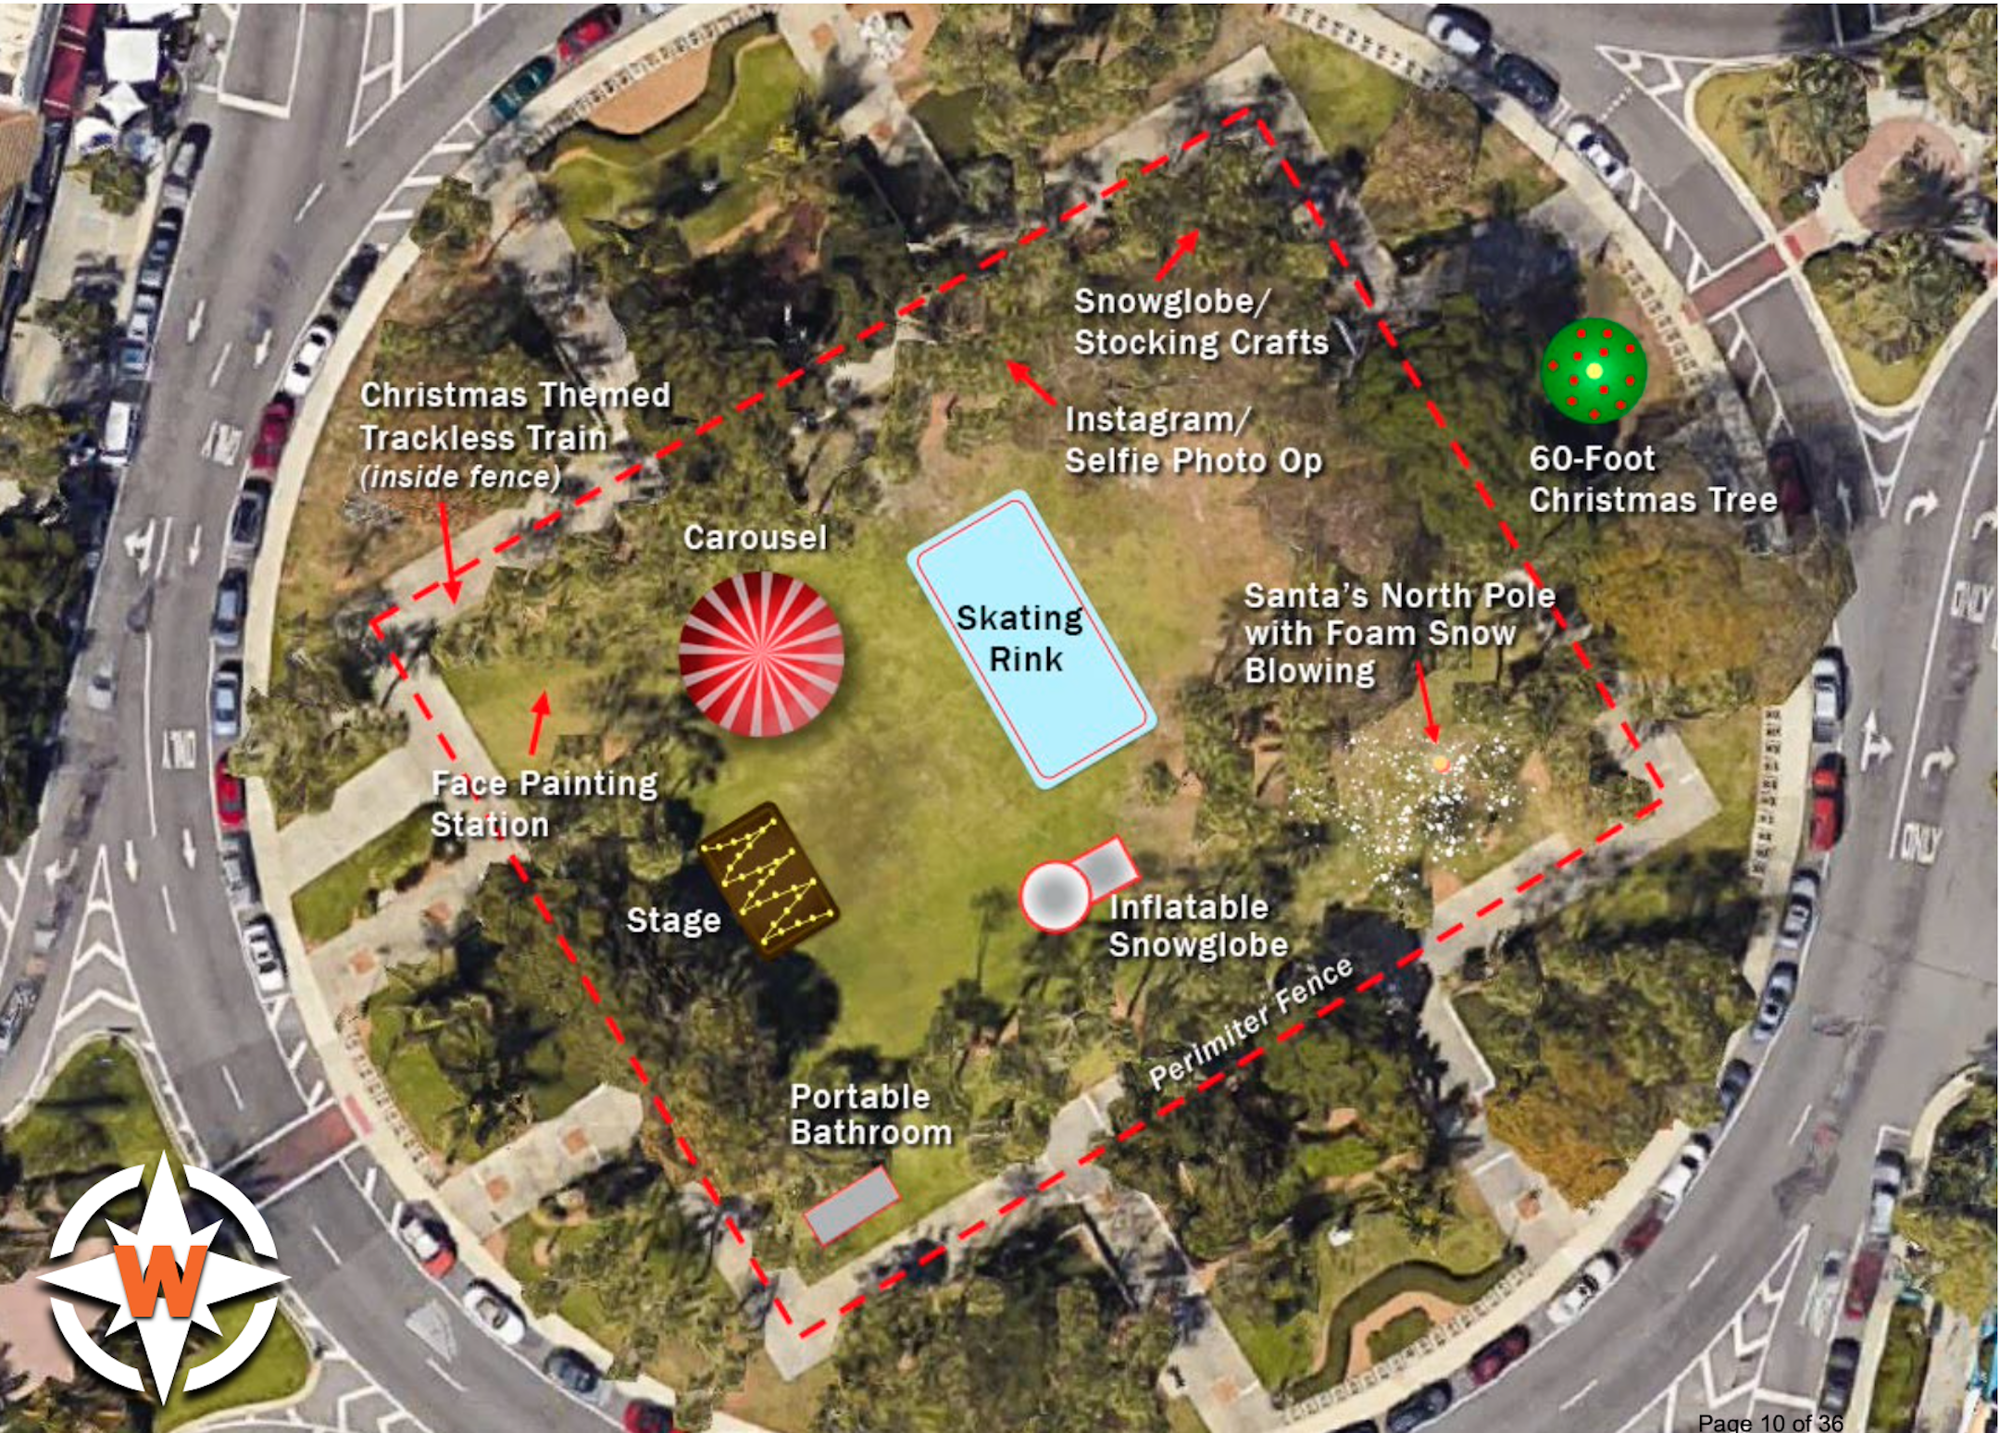 A site map shows the proposed layout of the winter festival in St. Armands  Circle.